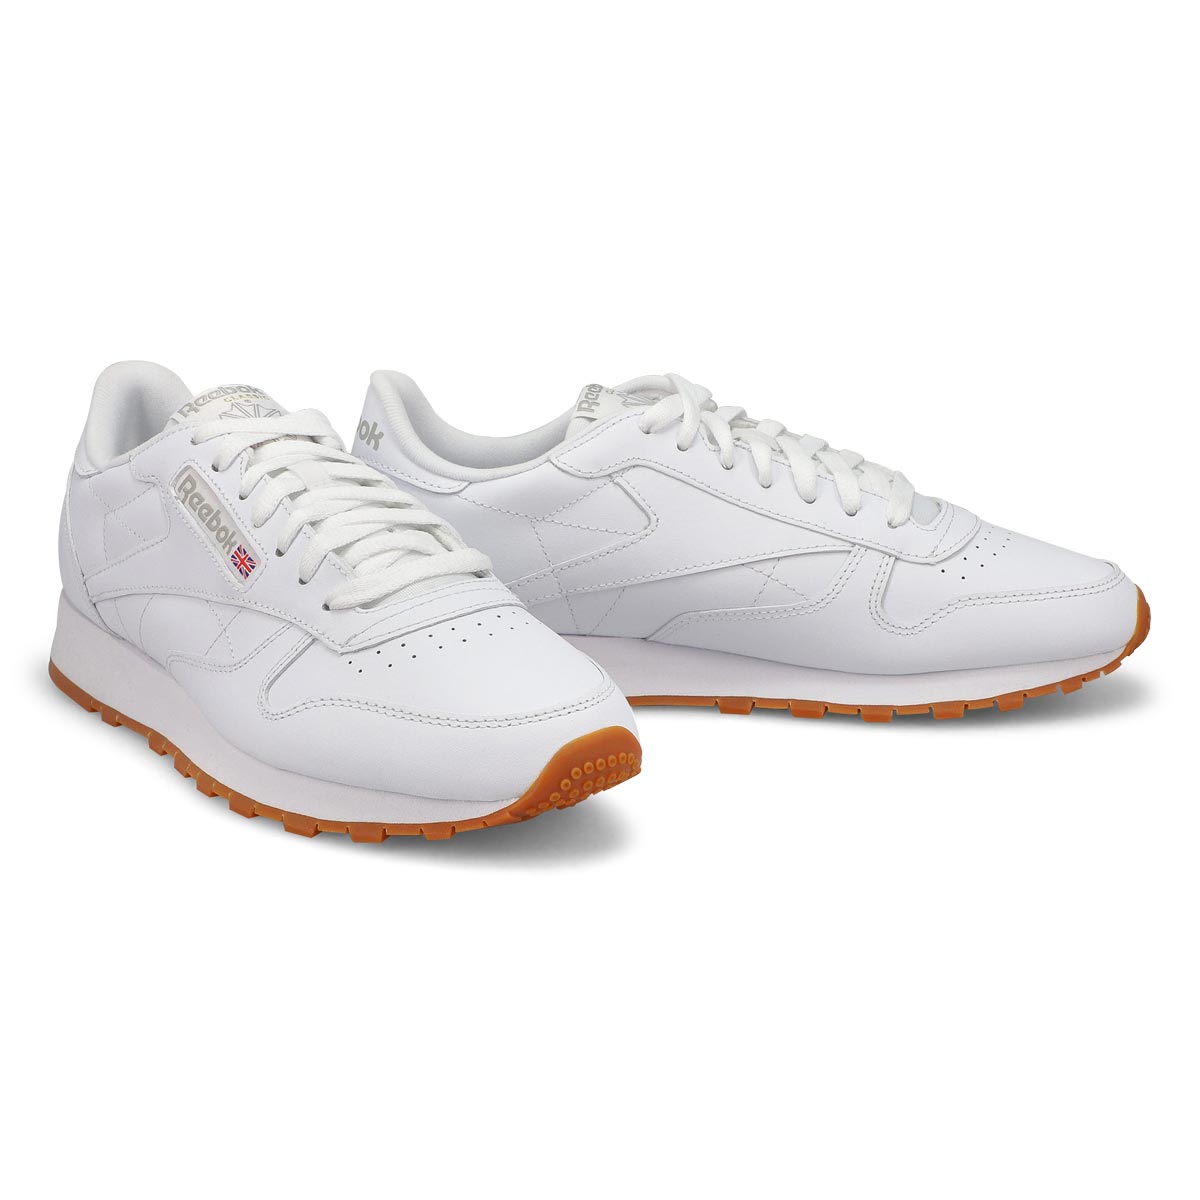 Mens Classic Leather Sneaker -White/Grey/Gum